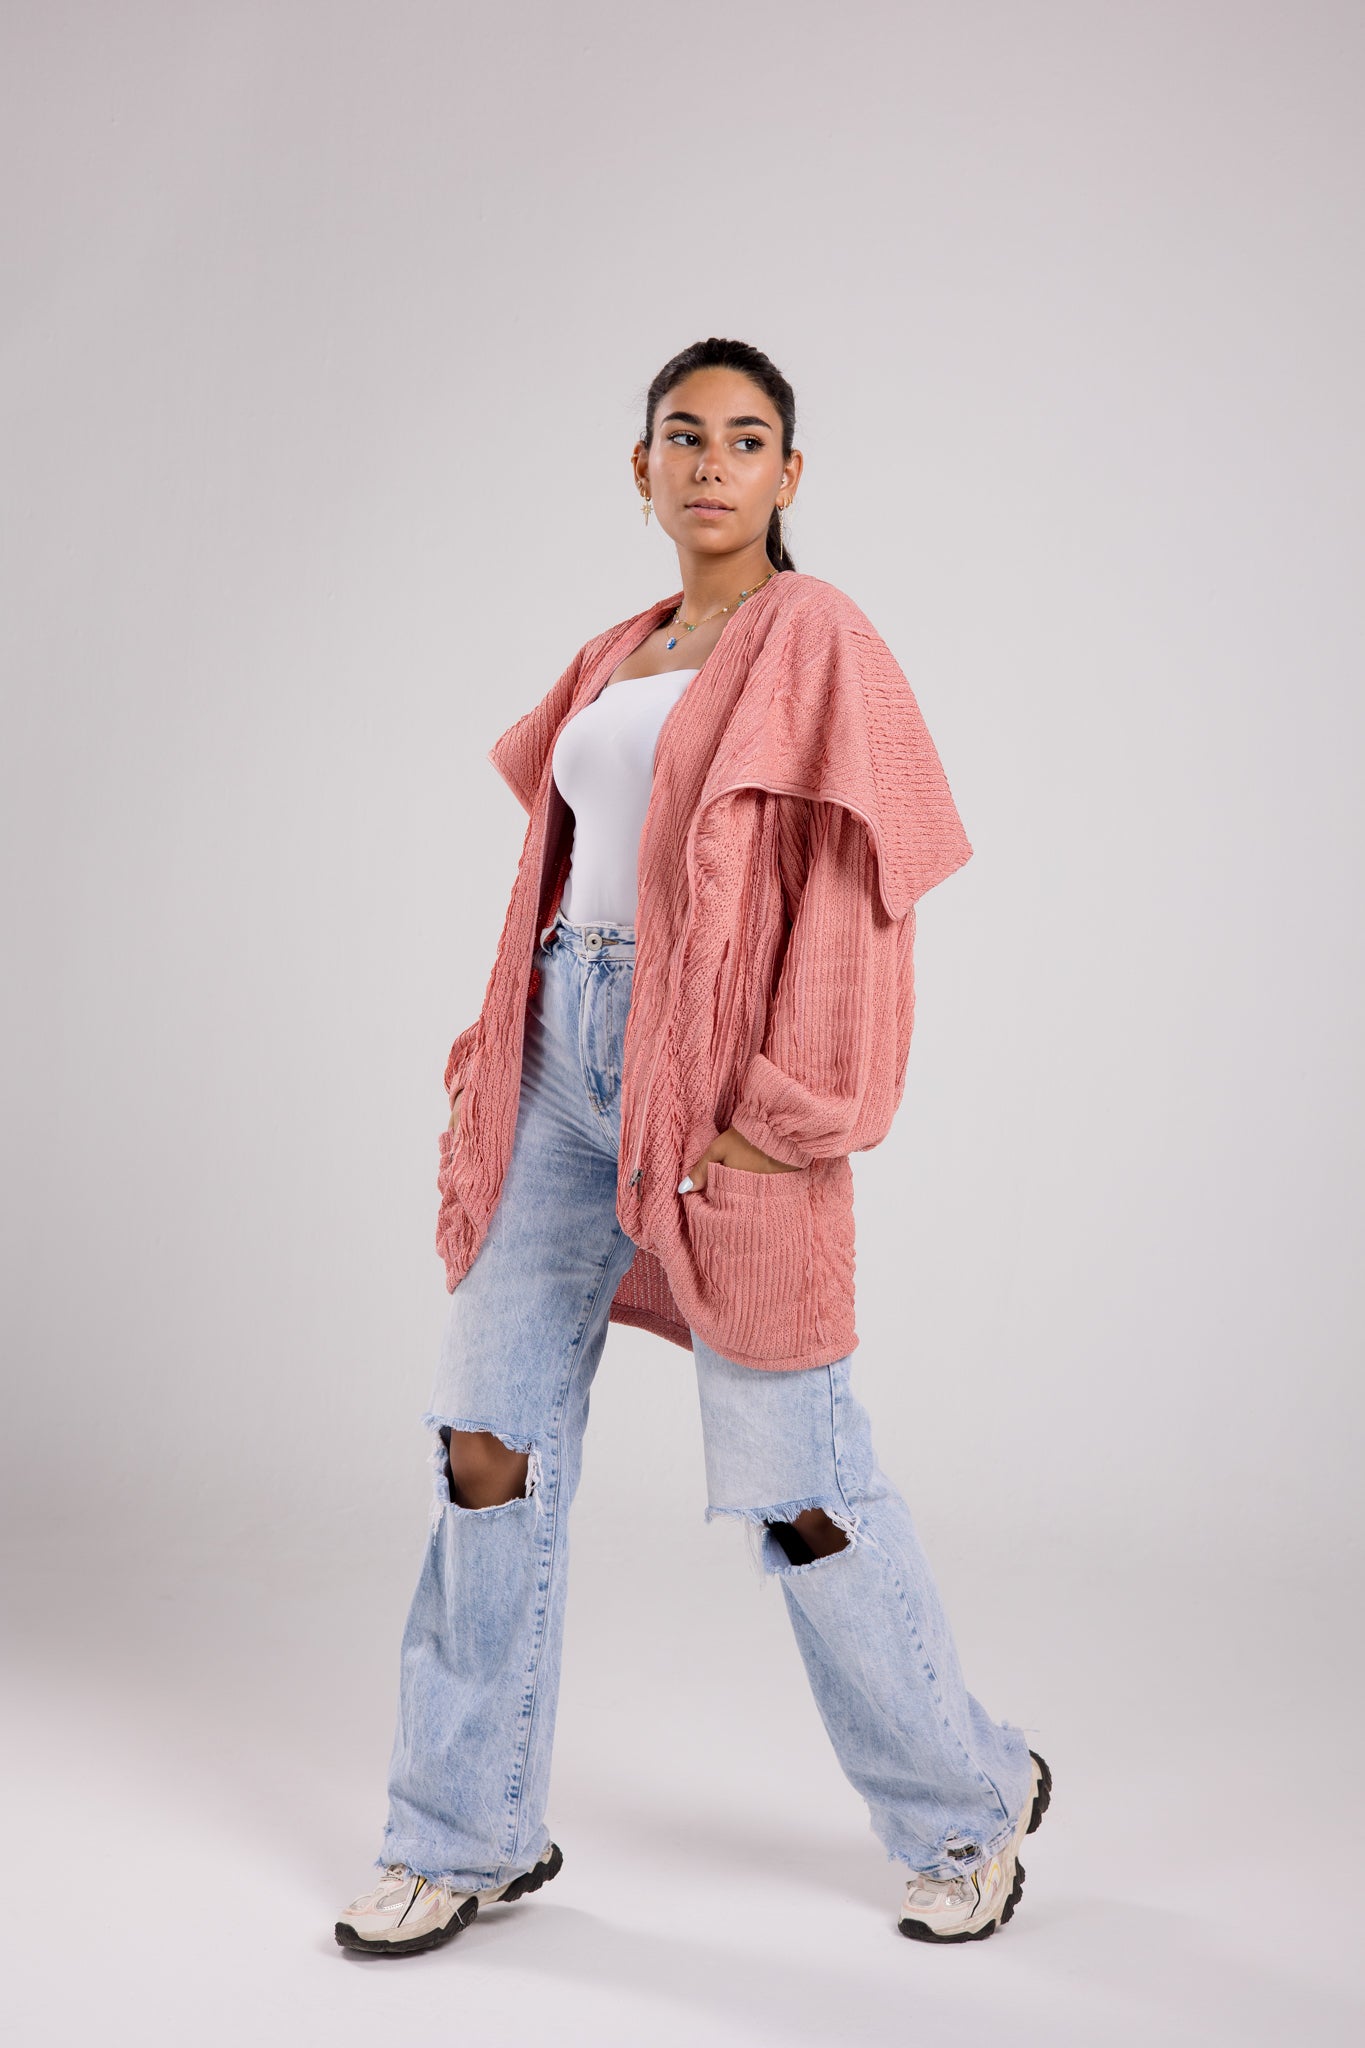 The ultimate jacket in pinky